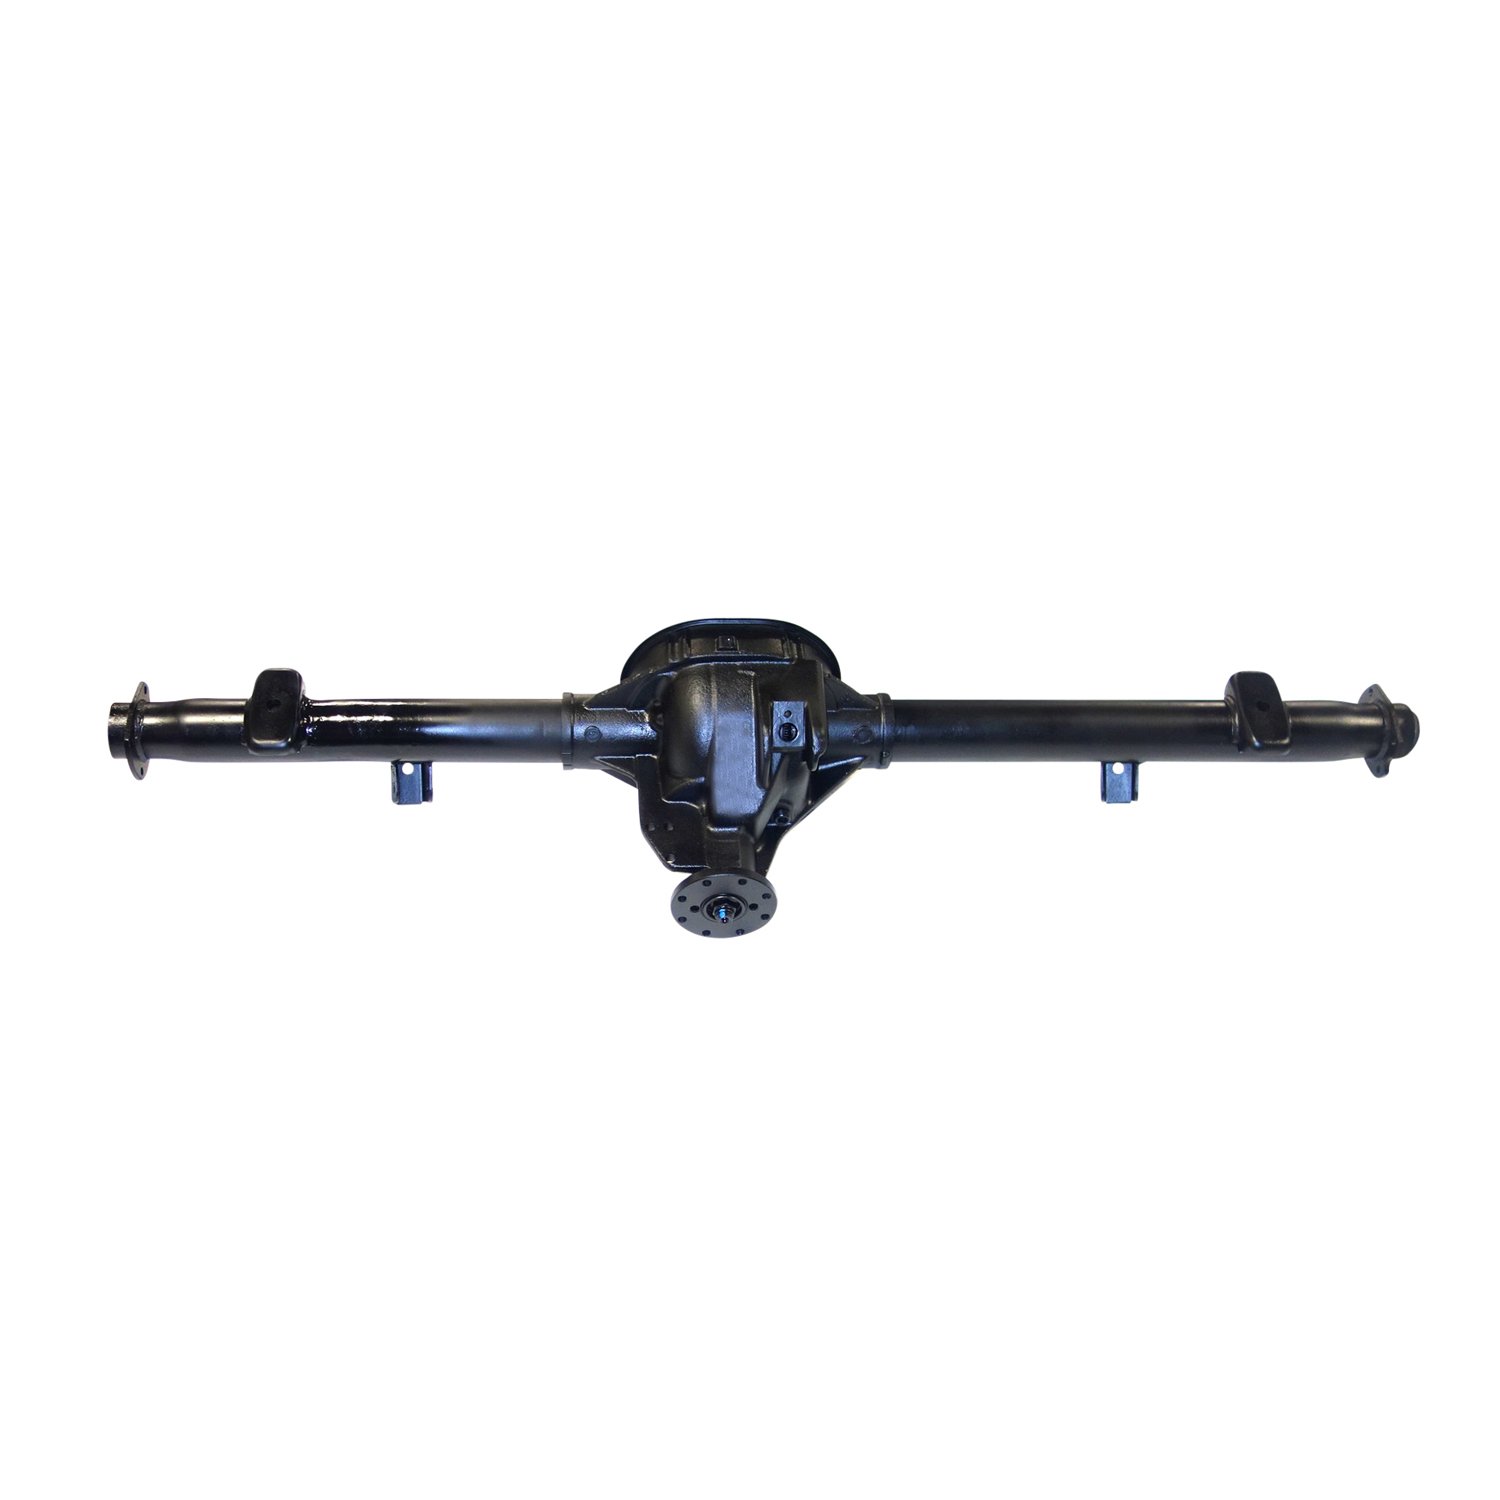 Remanufactured Axle Assy for 8.8" 2000 F150 3.31, Rear Drum, Posi LSD *Check Tag*